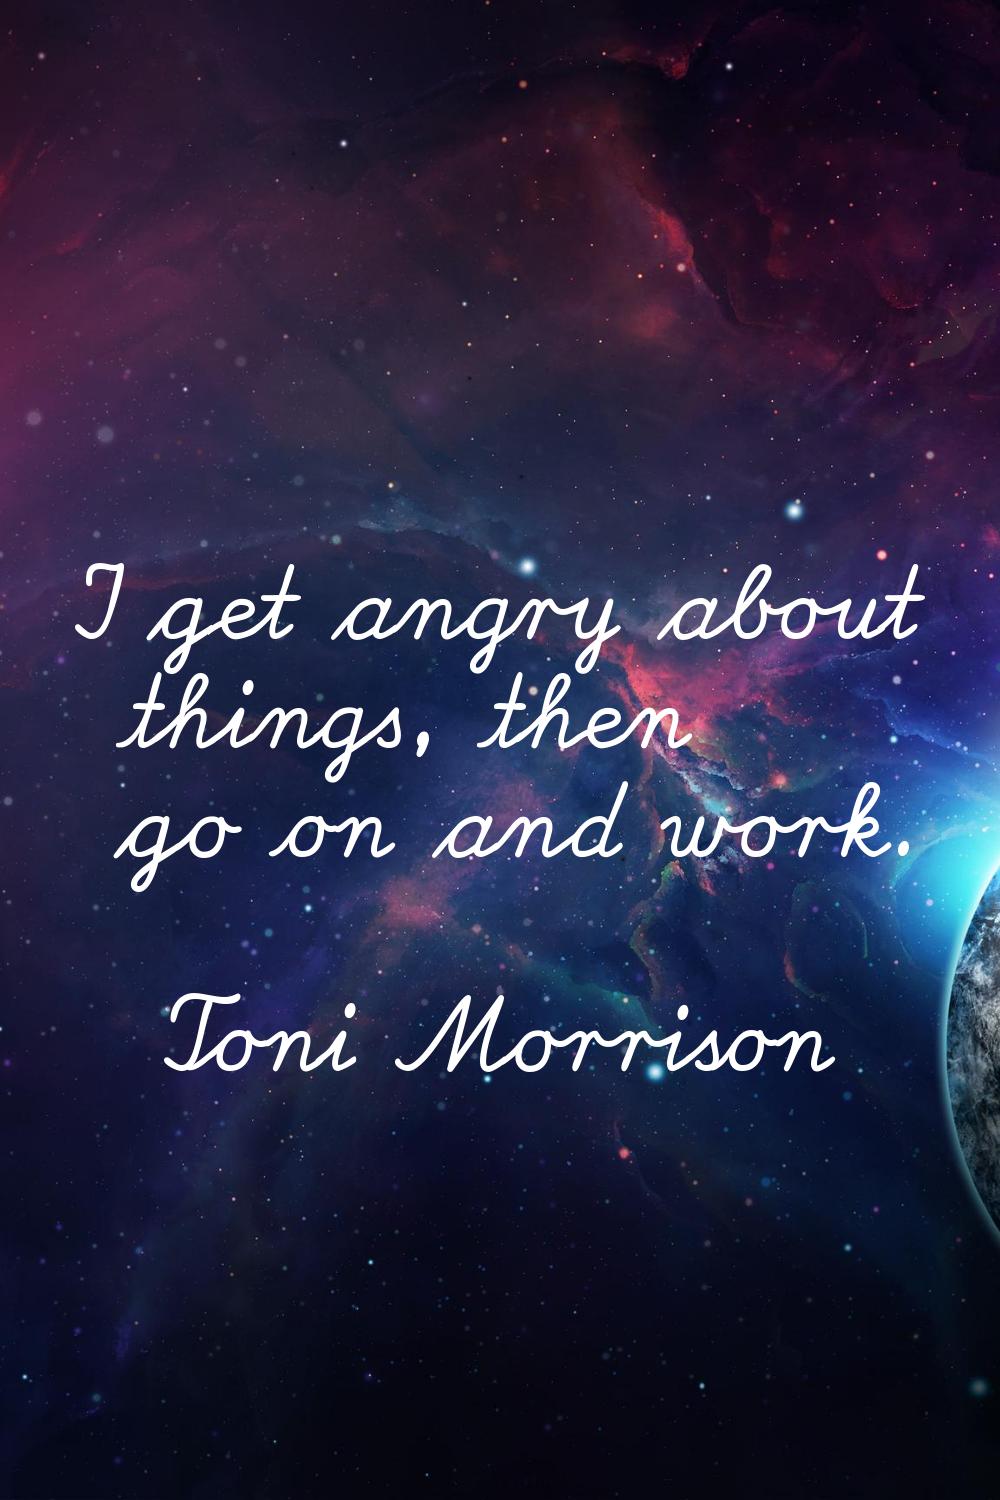 I get angry about things, then go on and work.